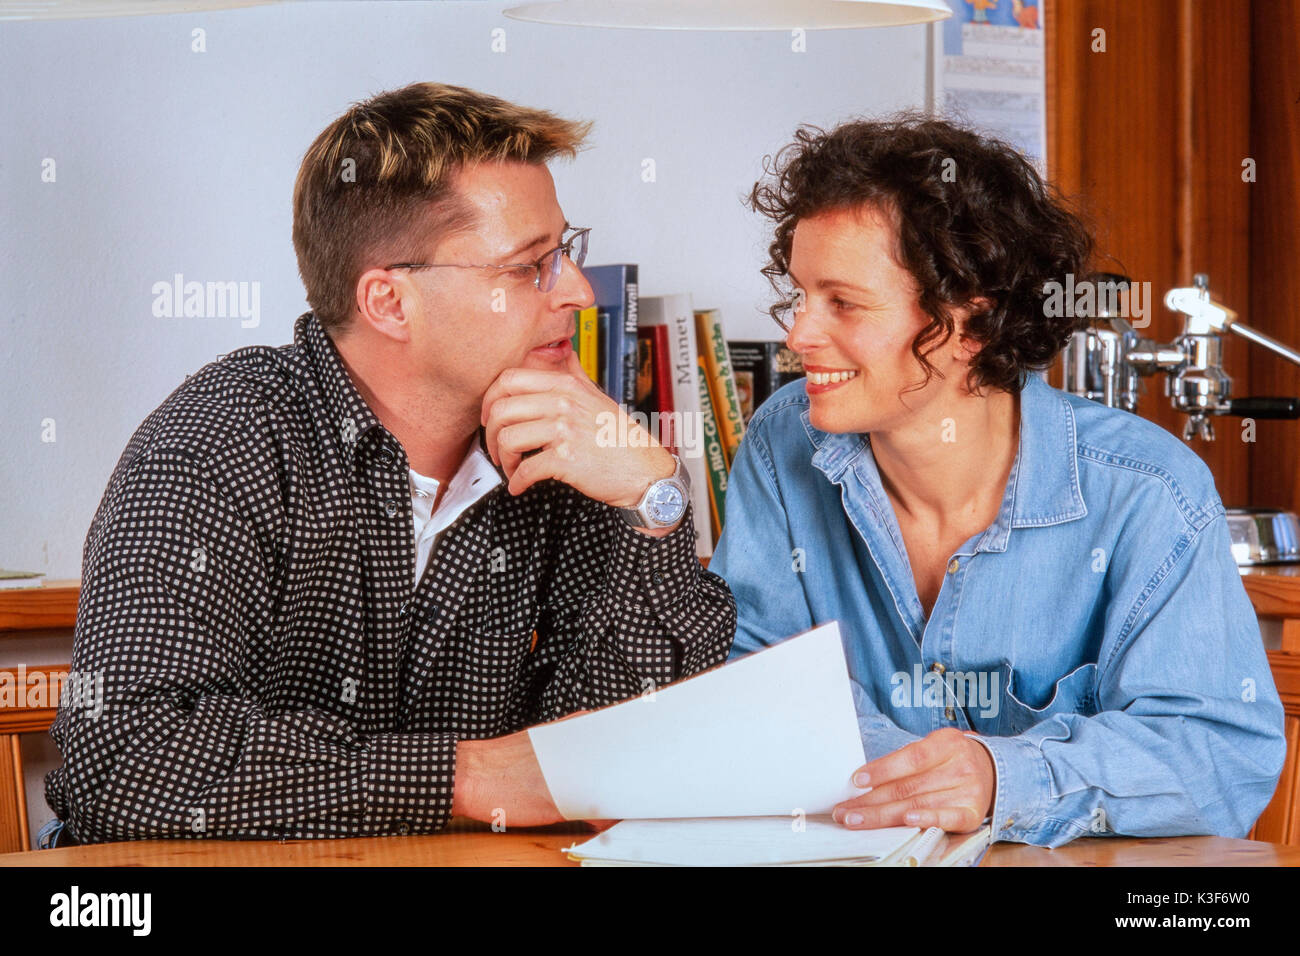 Parents, partners consult Stock Photo